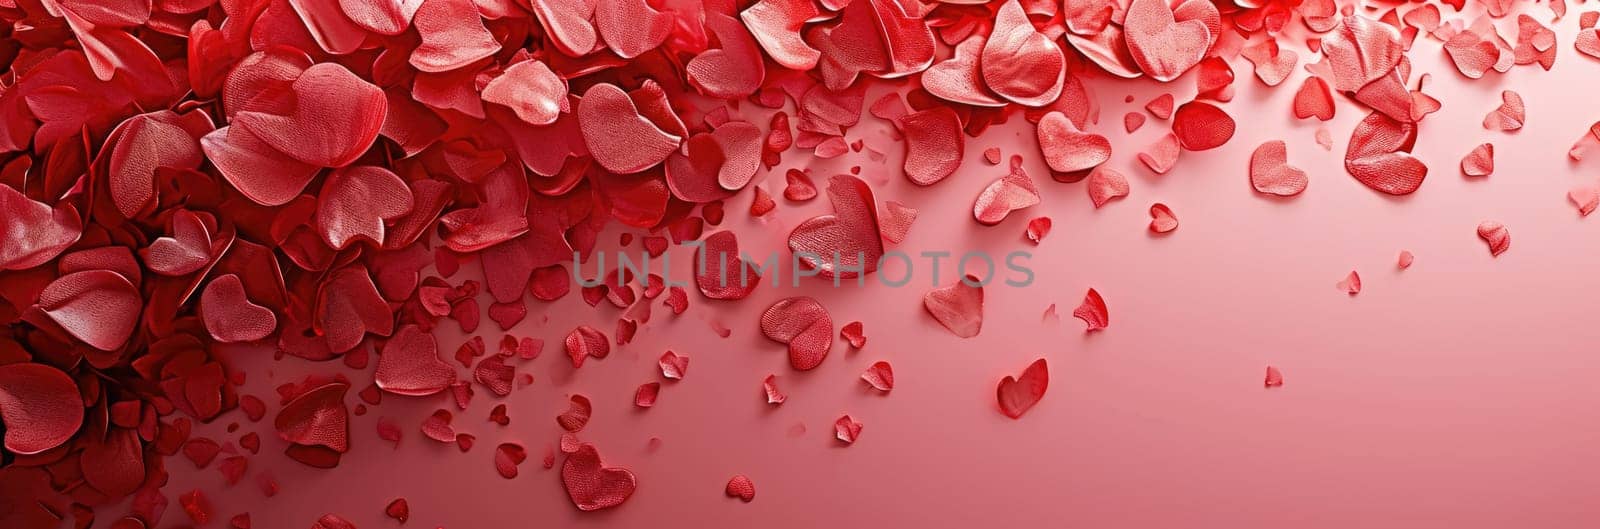 red and white valentines day background pragma by biancoblue